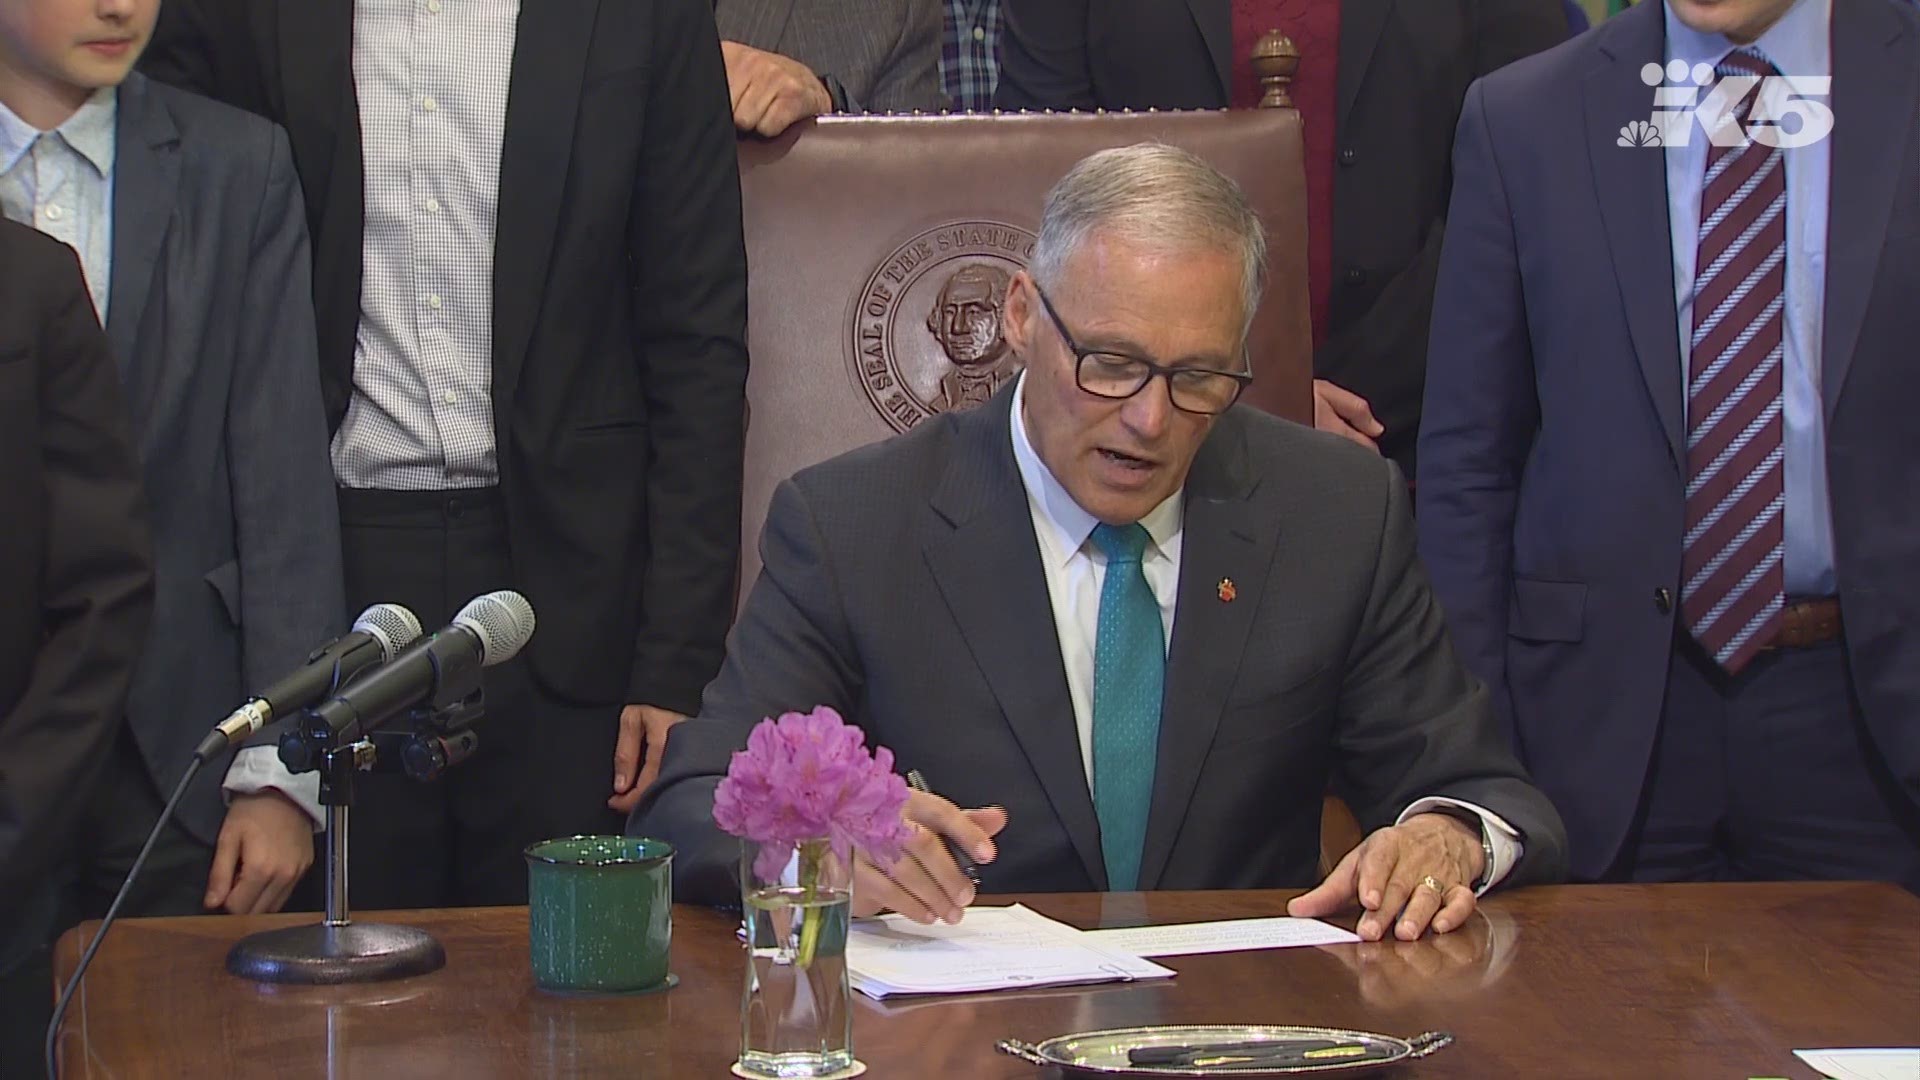 Washington state became the first state to legalize human composting on Tuesday when Gov. Jay Inslee signed SB 5001 into law.